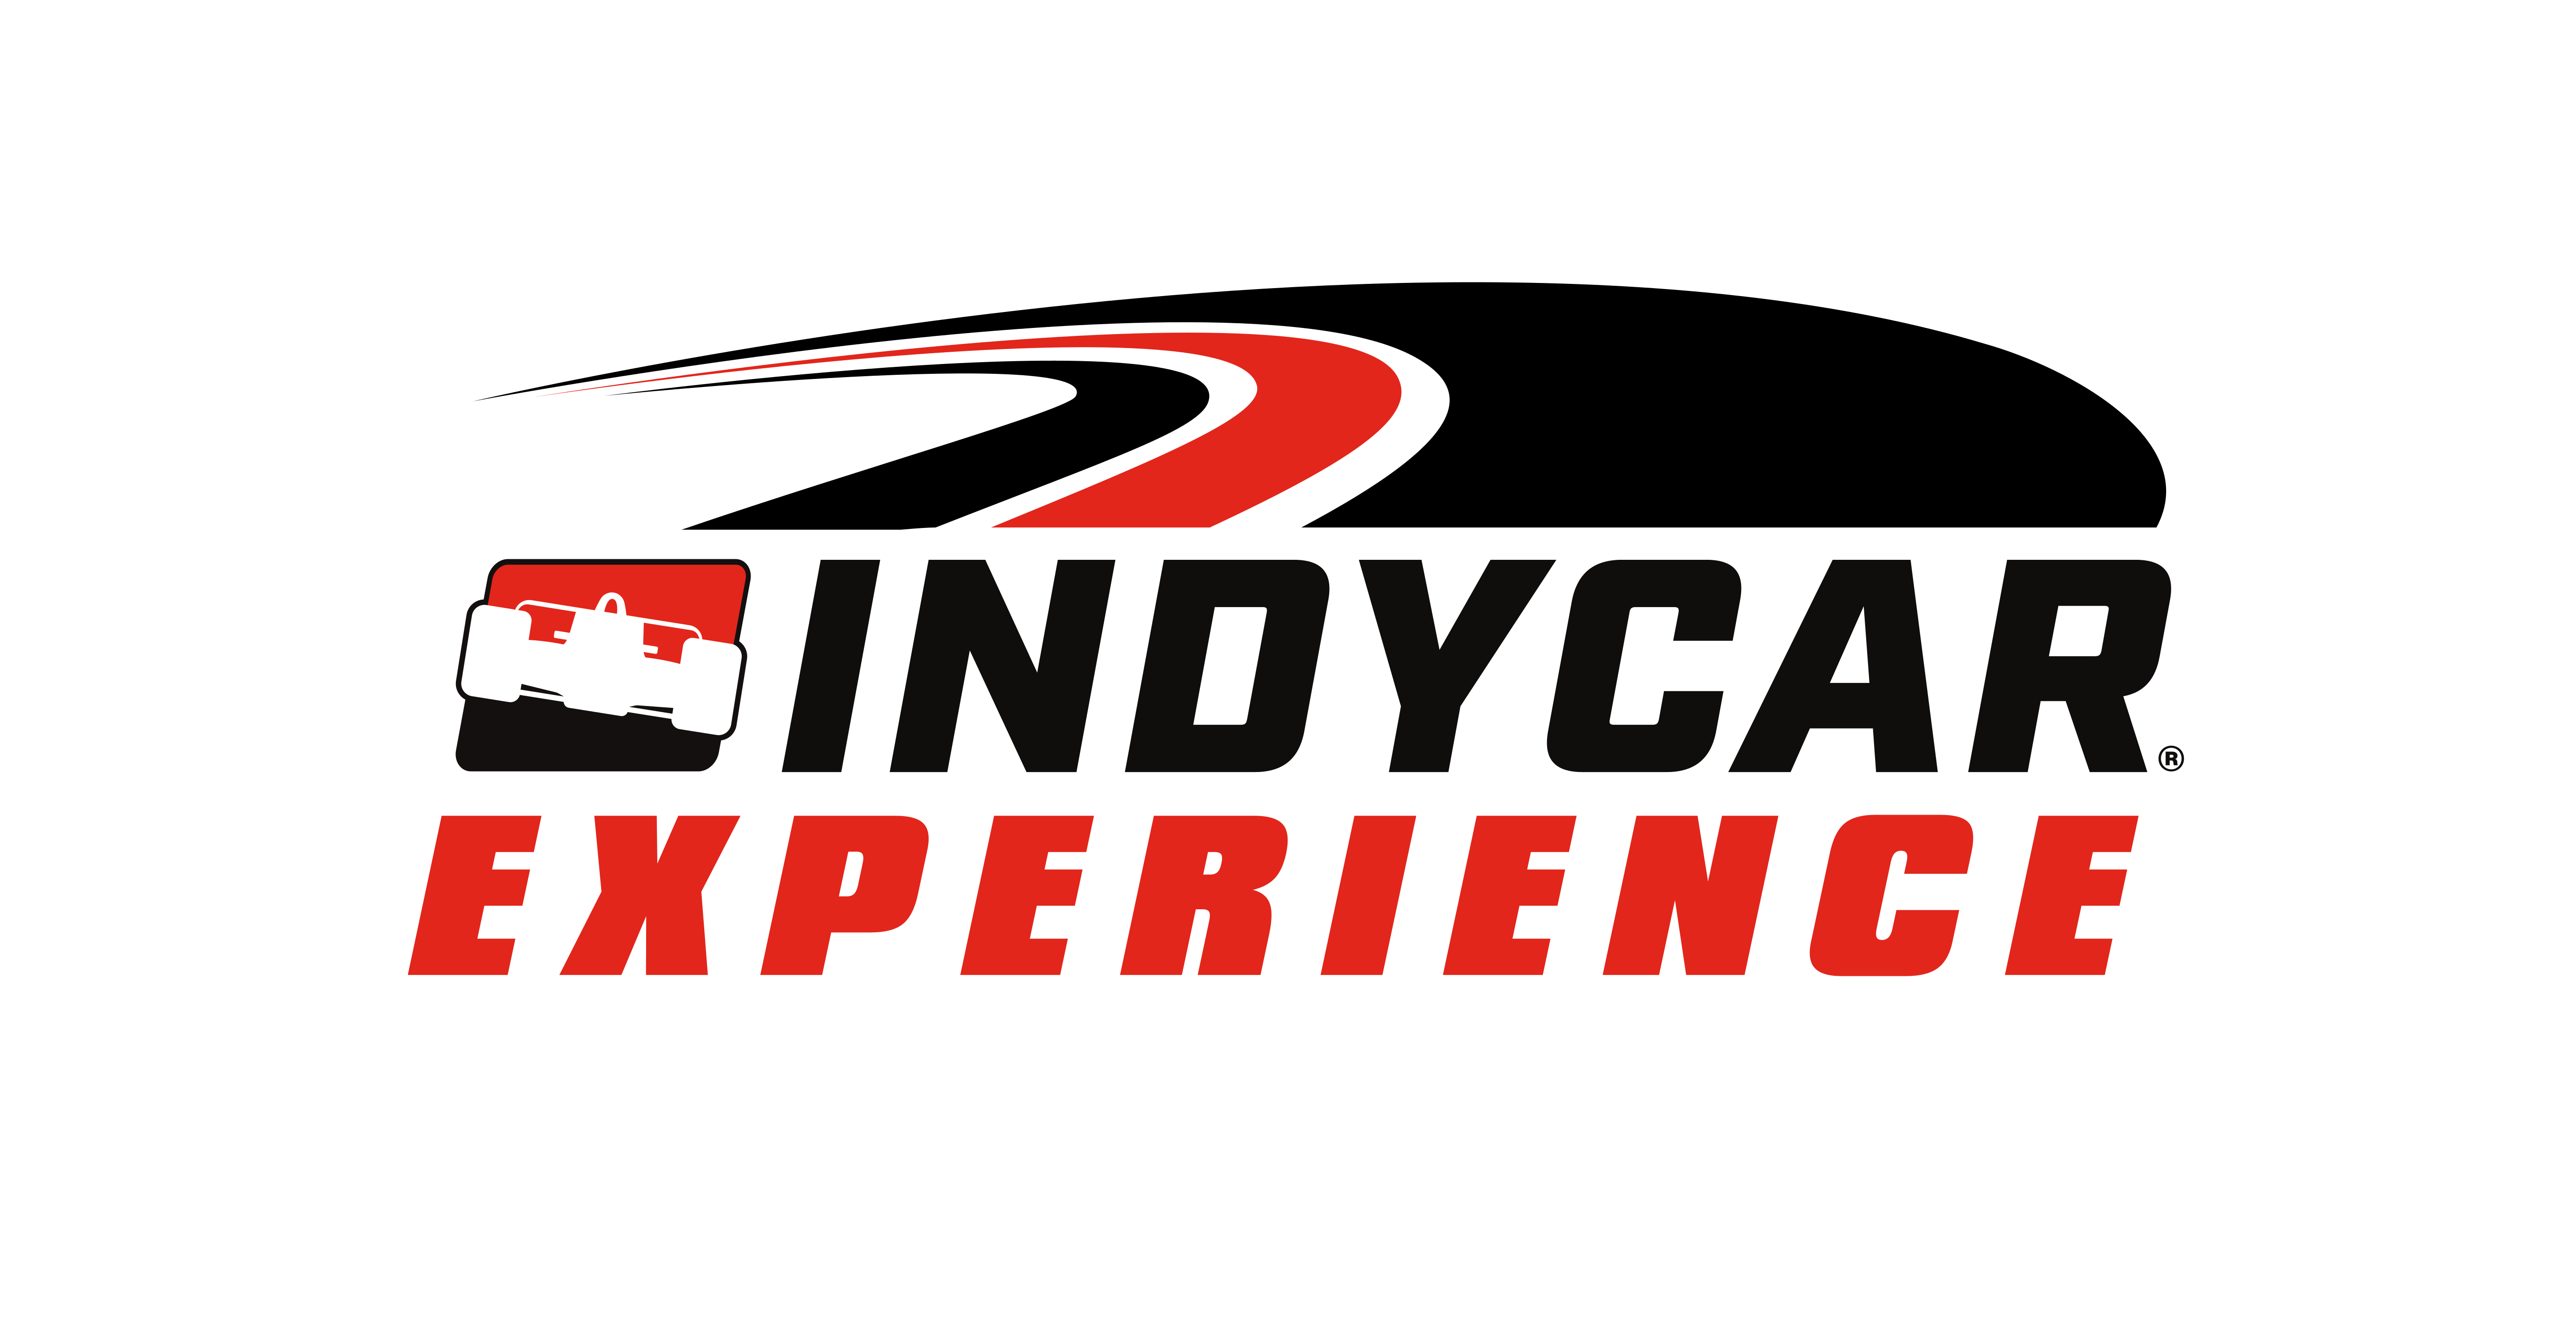 Indy Racing Experience